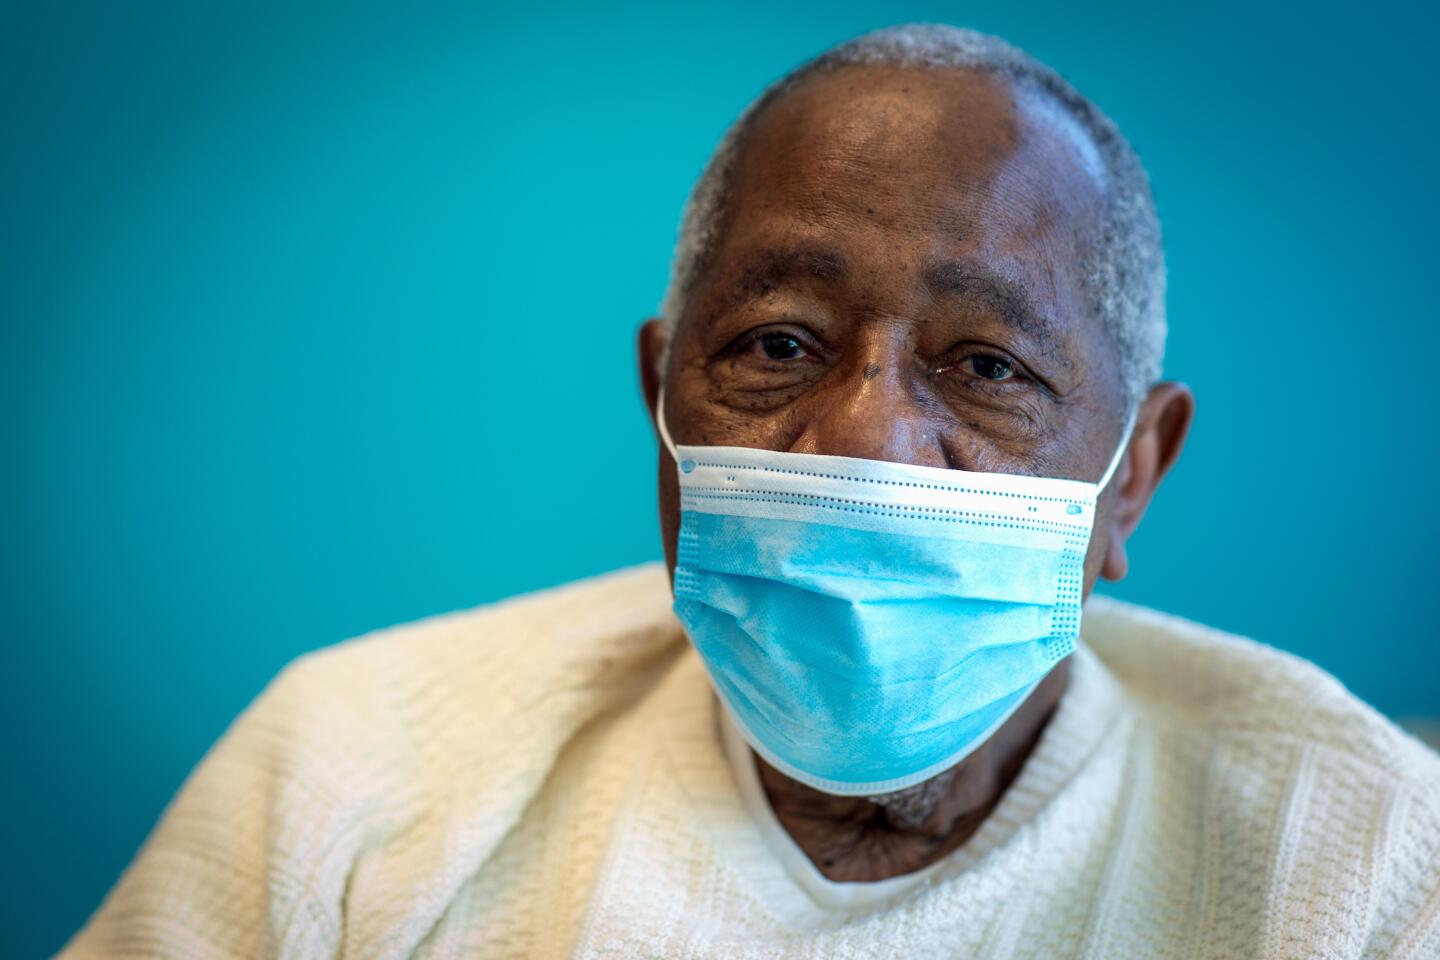 Baseball Hall of Famer Hank Aaron after receiving his COVID-19 vaccination